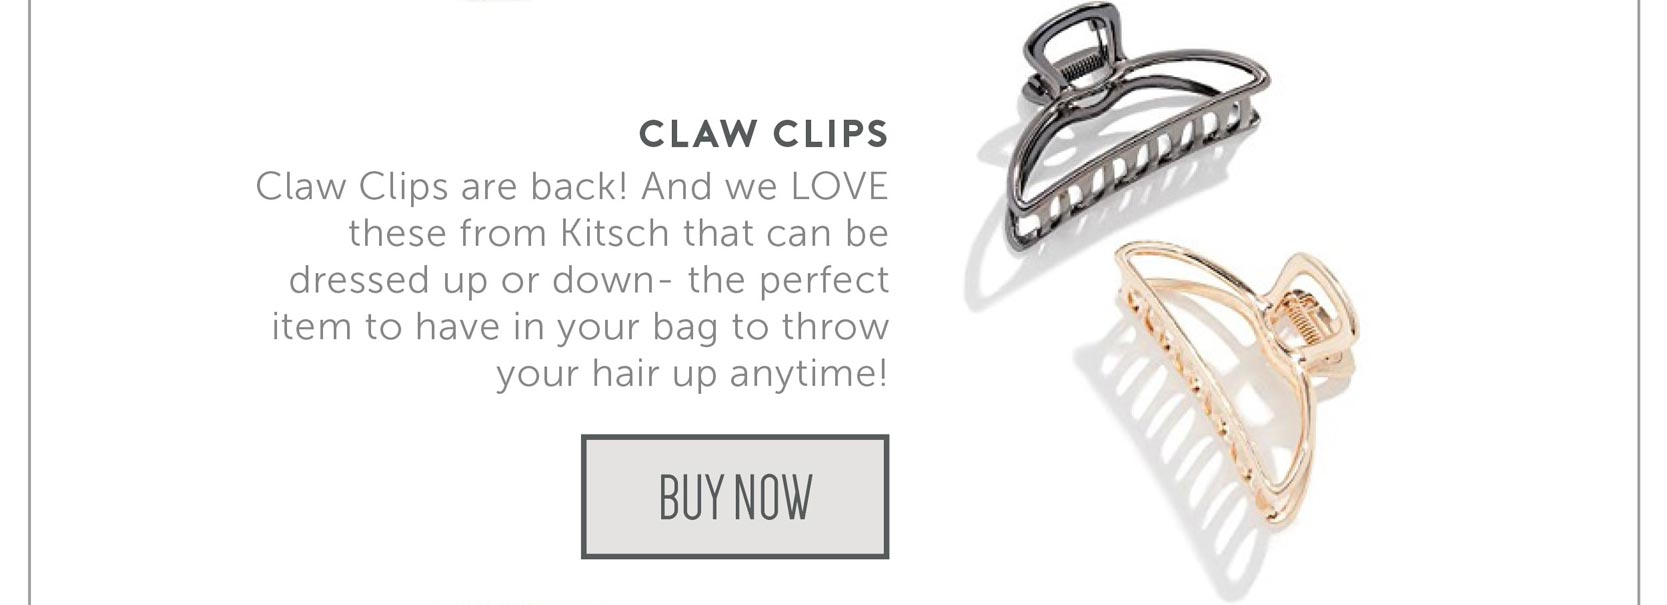 Claw Clips are back! And we LOVE these from Kitsch that can be dressed up or down- the perfect item to have in your bag to throw your hair up anytime!